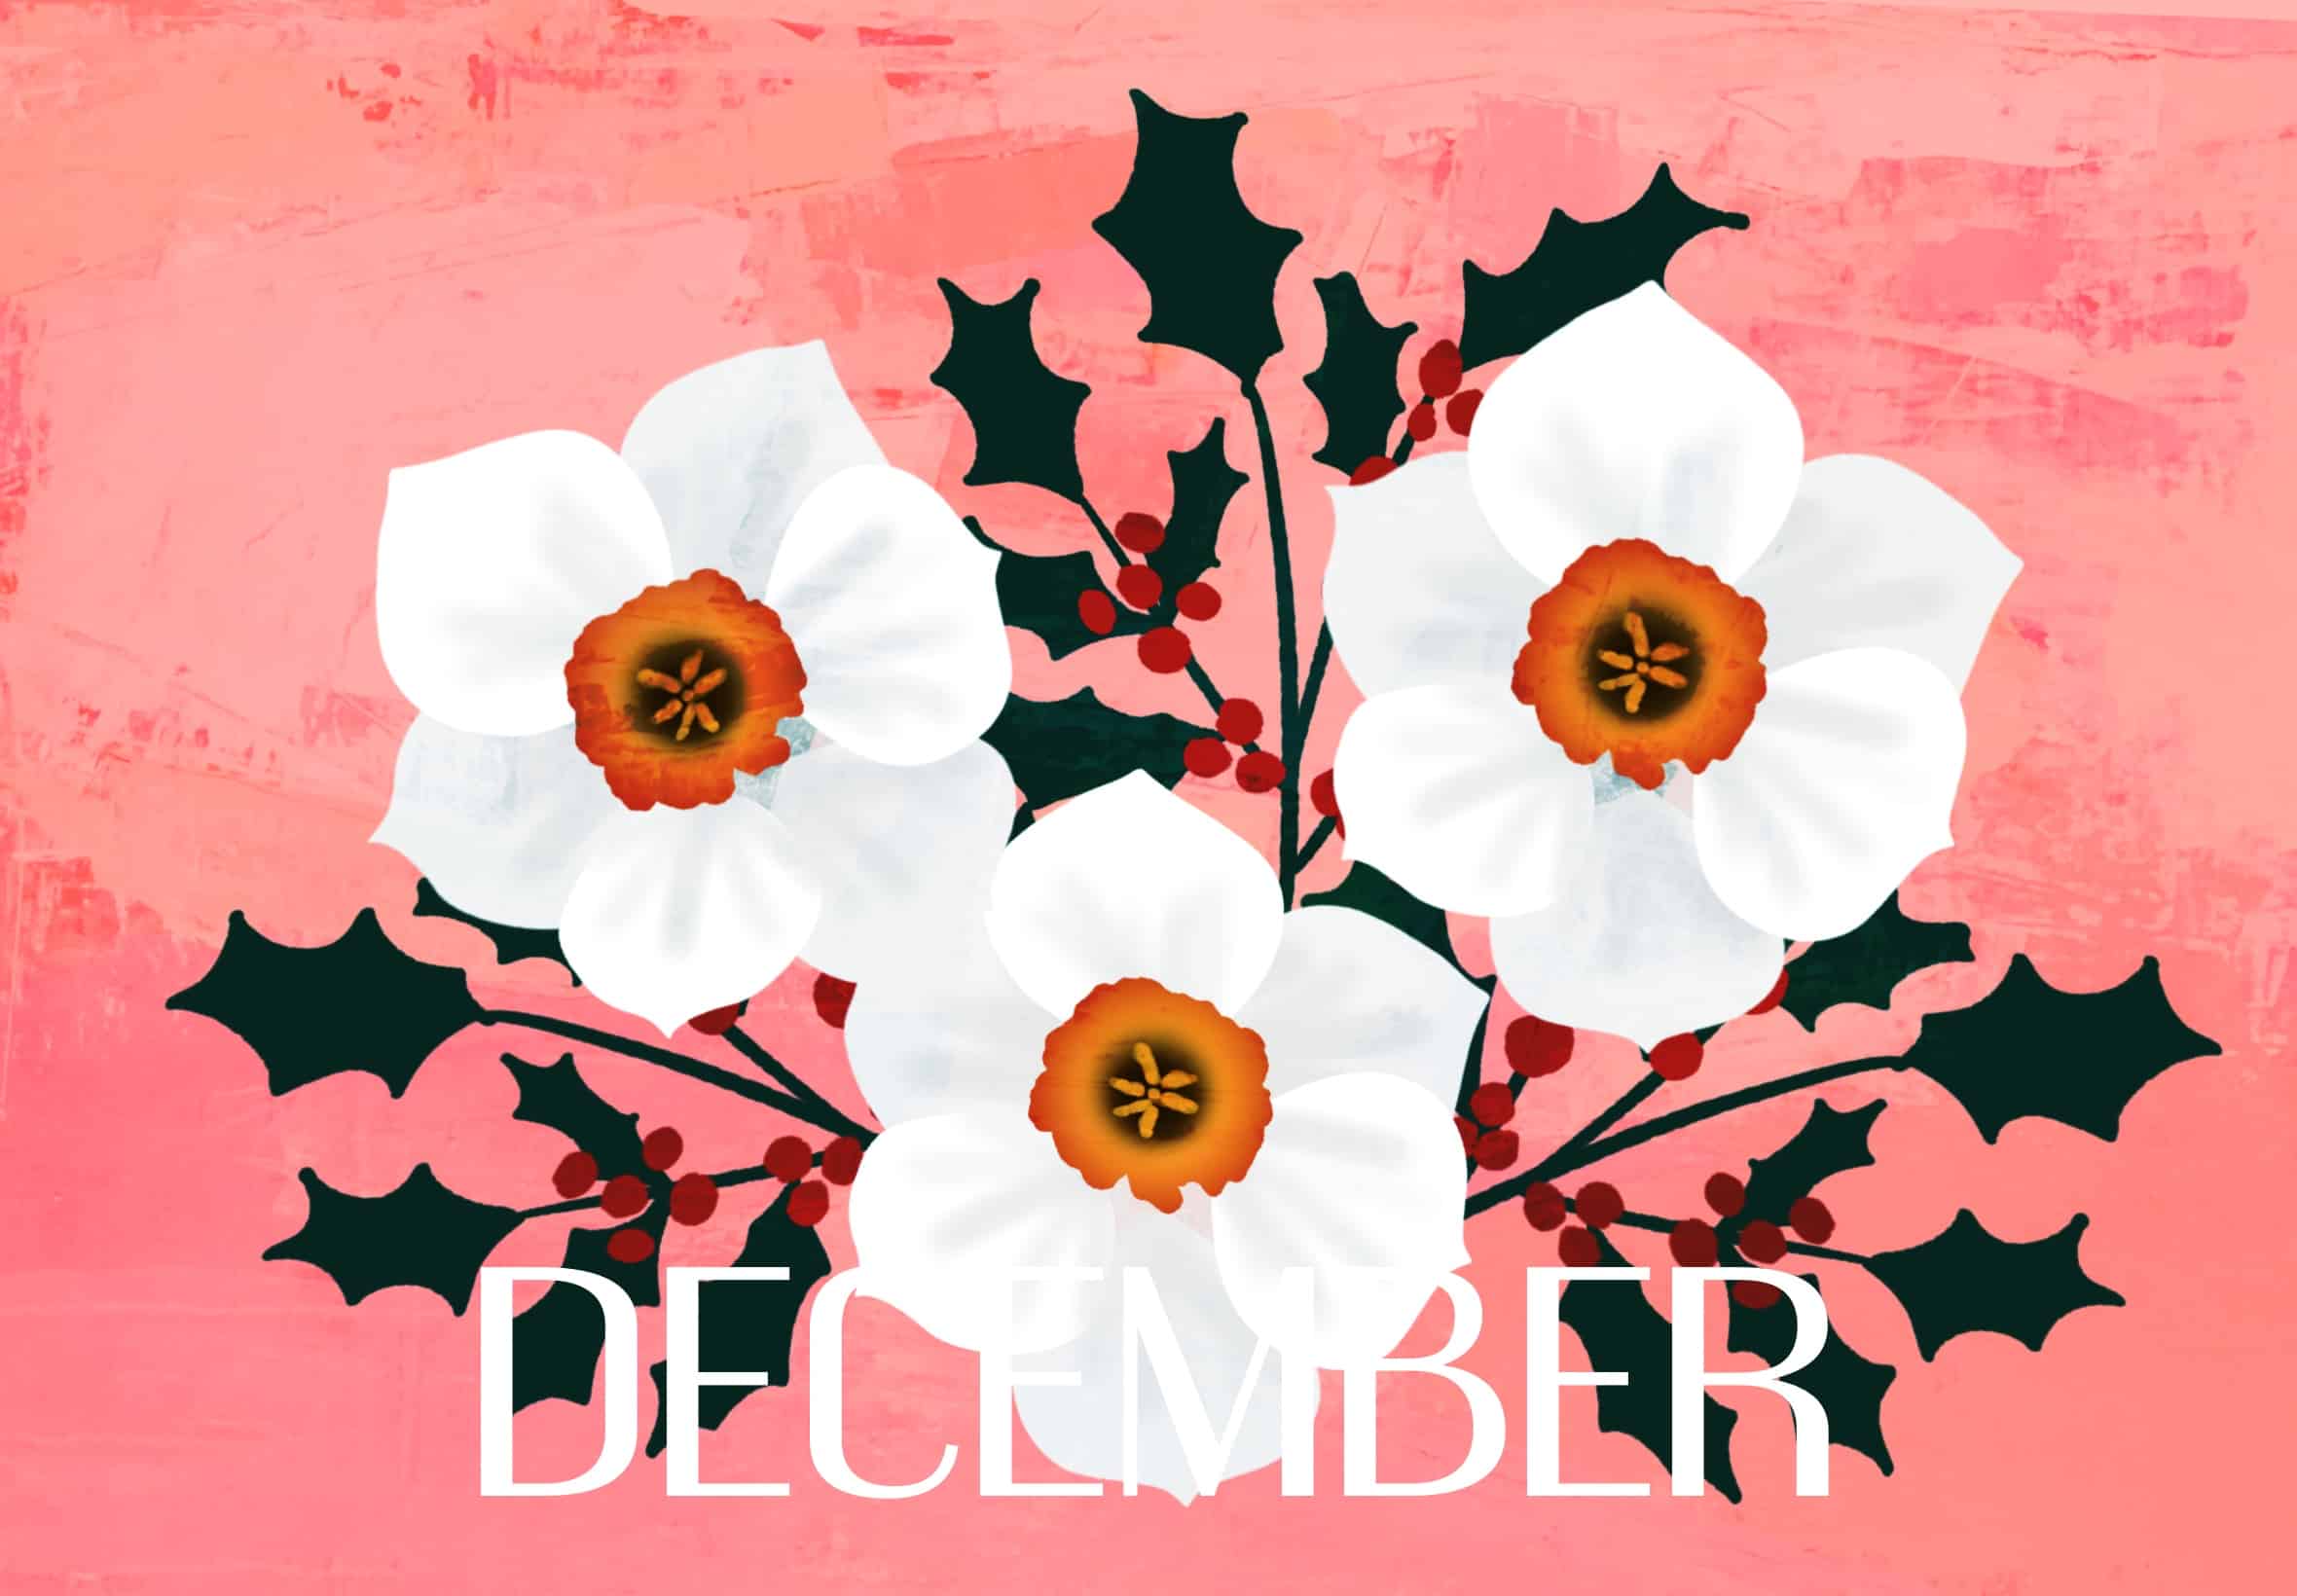 December Birth Month Flowers - Narcissus and Holly